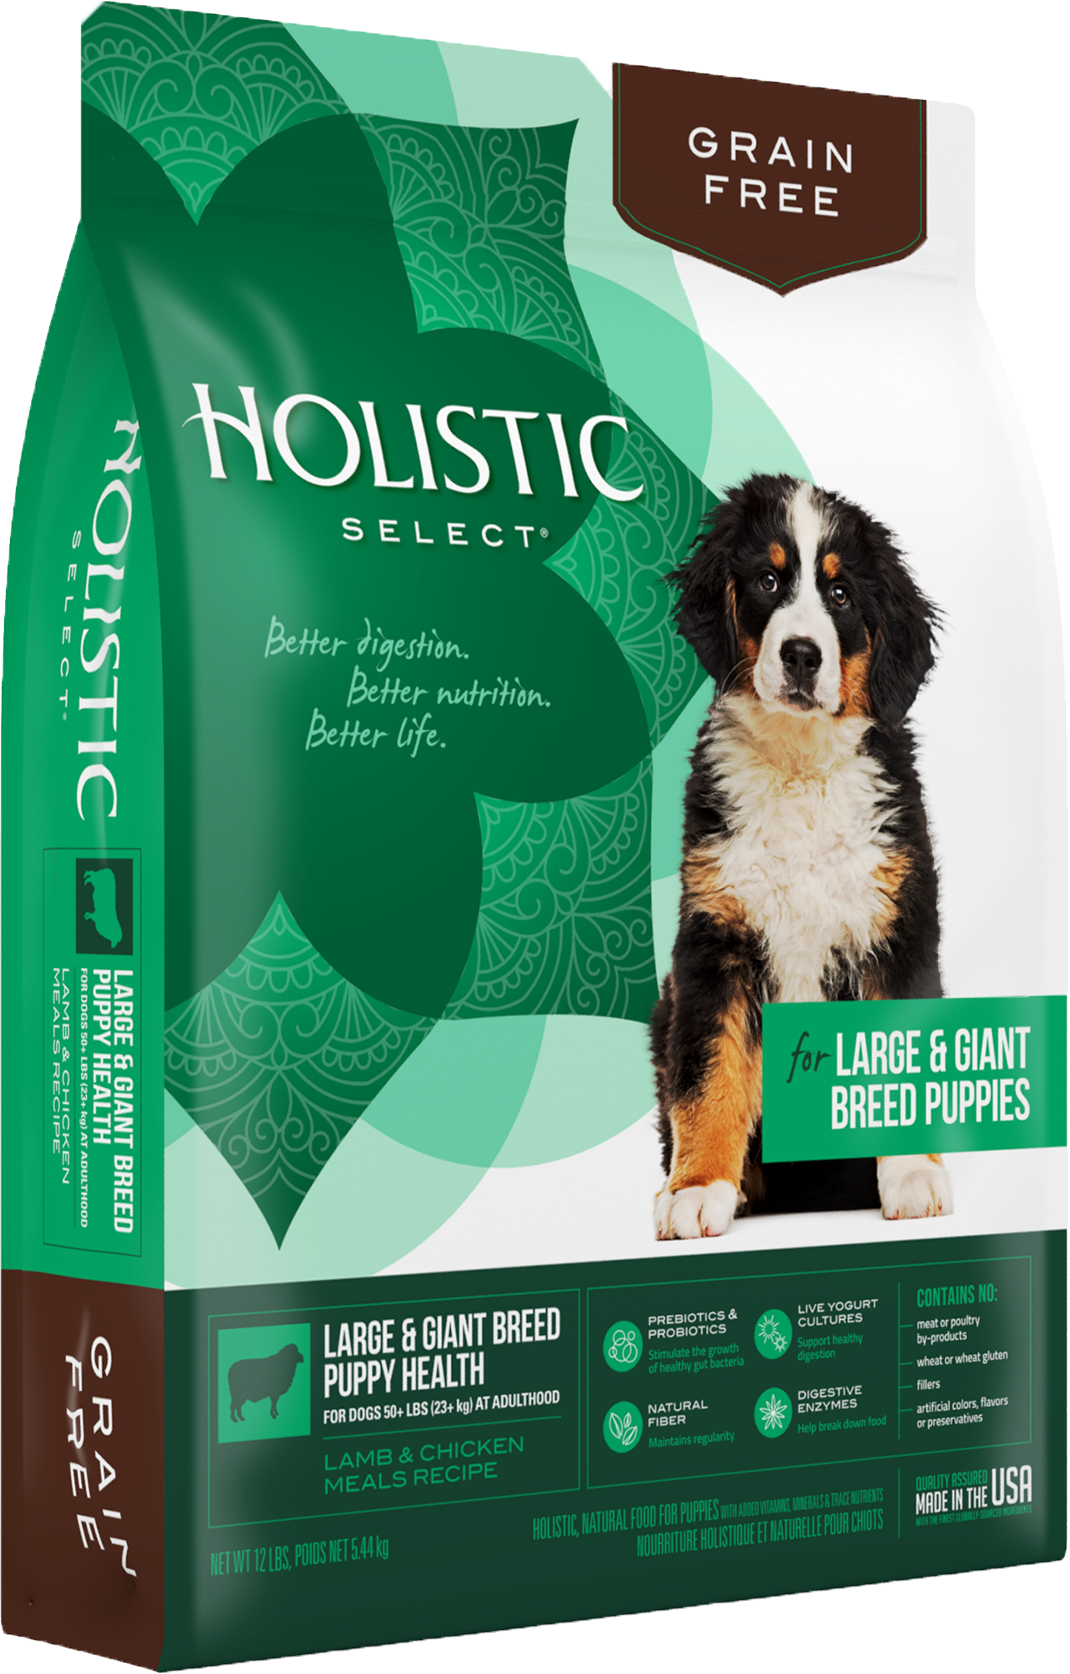 Grain Free Large & Giant Breed Puppy product packaging image 1